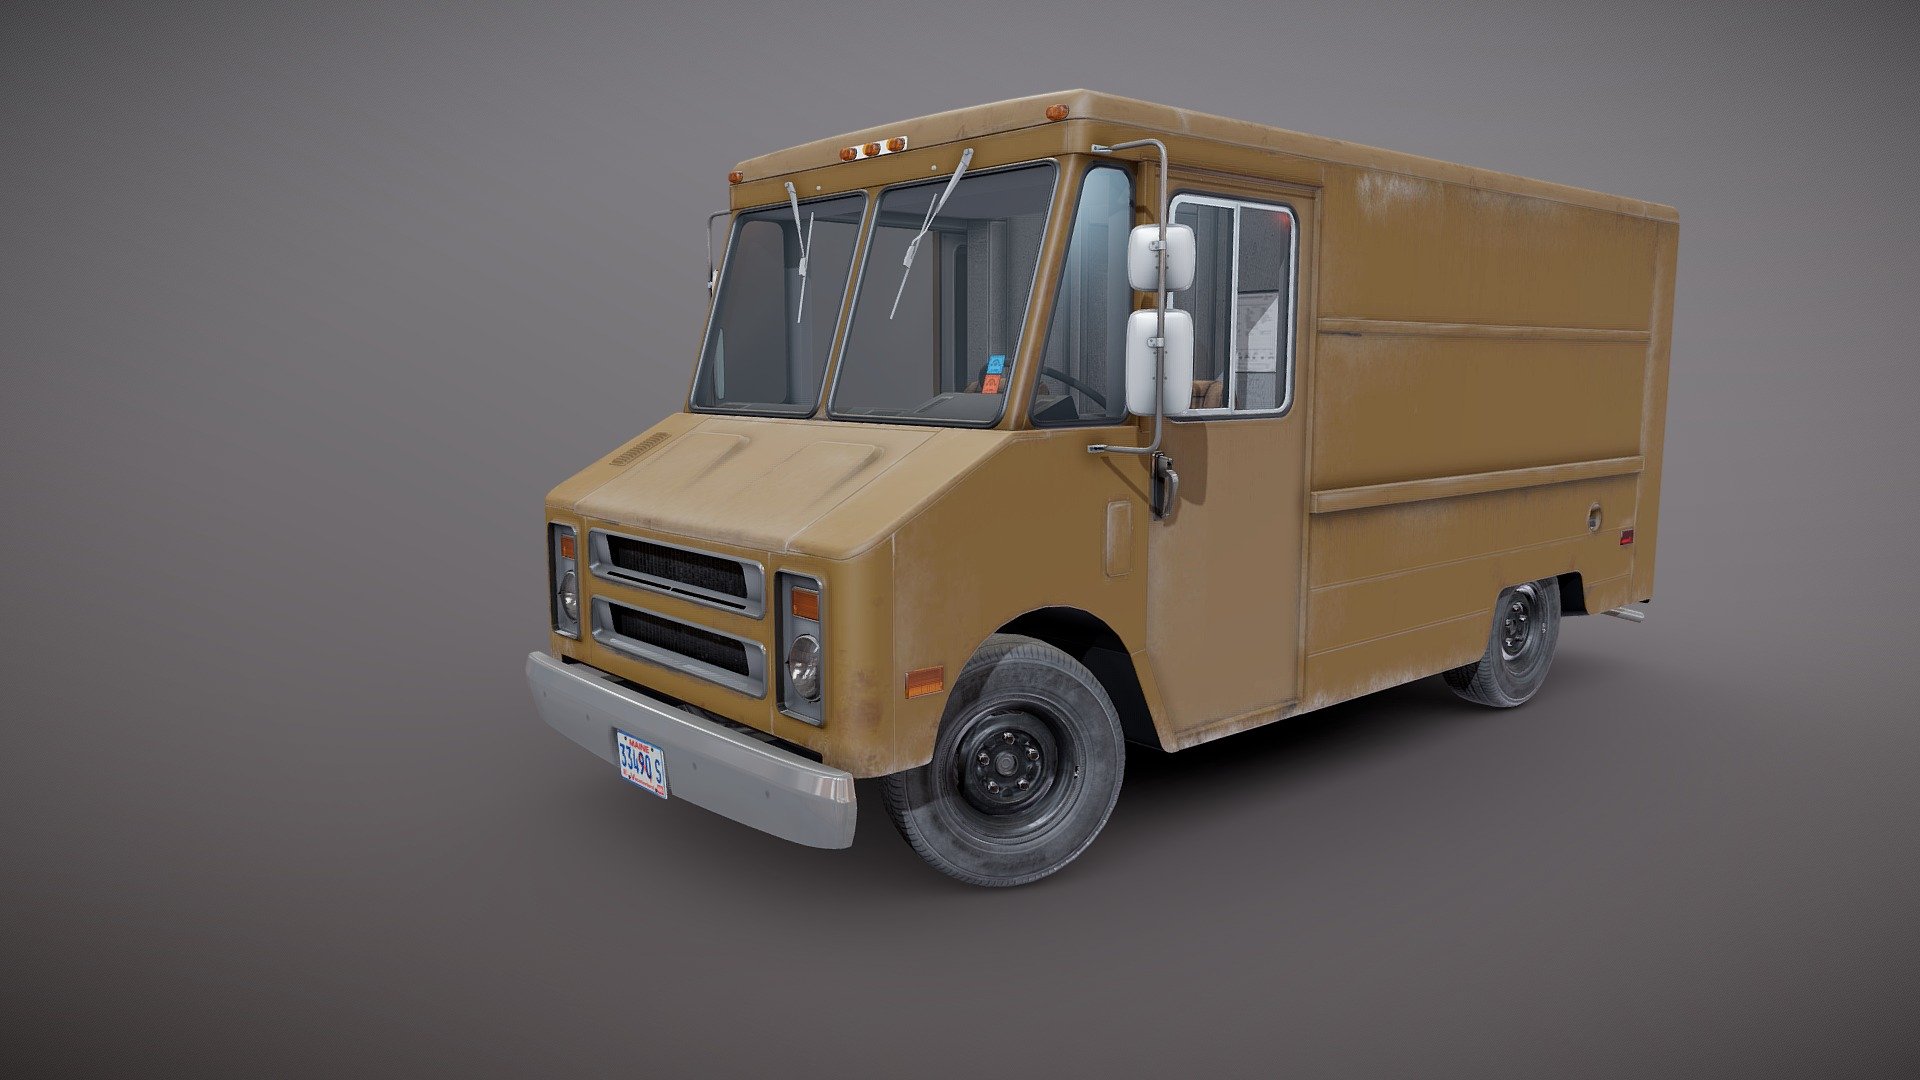 Farmer pickup truck game ready model.

Full textured model with clean topology.

High accuracy exterior model.

High detailed cabin - seams, rivets, chrome parts, wipers, mud flaps and etc.

Side and back doors are openable.

Lowpoly interior - 3432 tris 2154 verts

Wheels - 11292 tris 6104 verts

Full model - 42996 tris 25517 verts.

High detailed rims and tires, with PBR maps(Base_Color/Metallic/Normal/Roughness.png2048x2048 )

Original scale.

Original scale. Lenght 4.86m , width 1.86m , height 2.24m.

Model ready for real-time apps, games, virtual reality and augmented reality.

Asset looks accuracy and realistic and will be a good part of your project 3d model